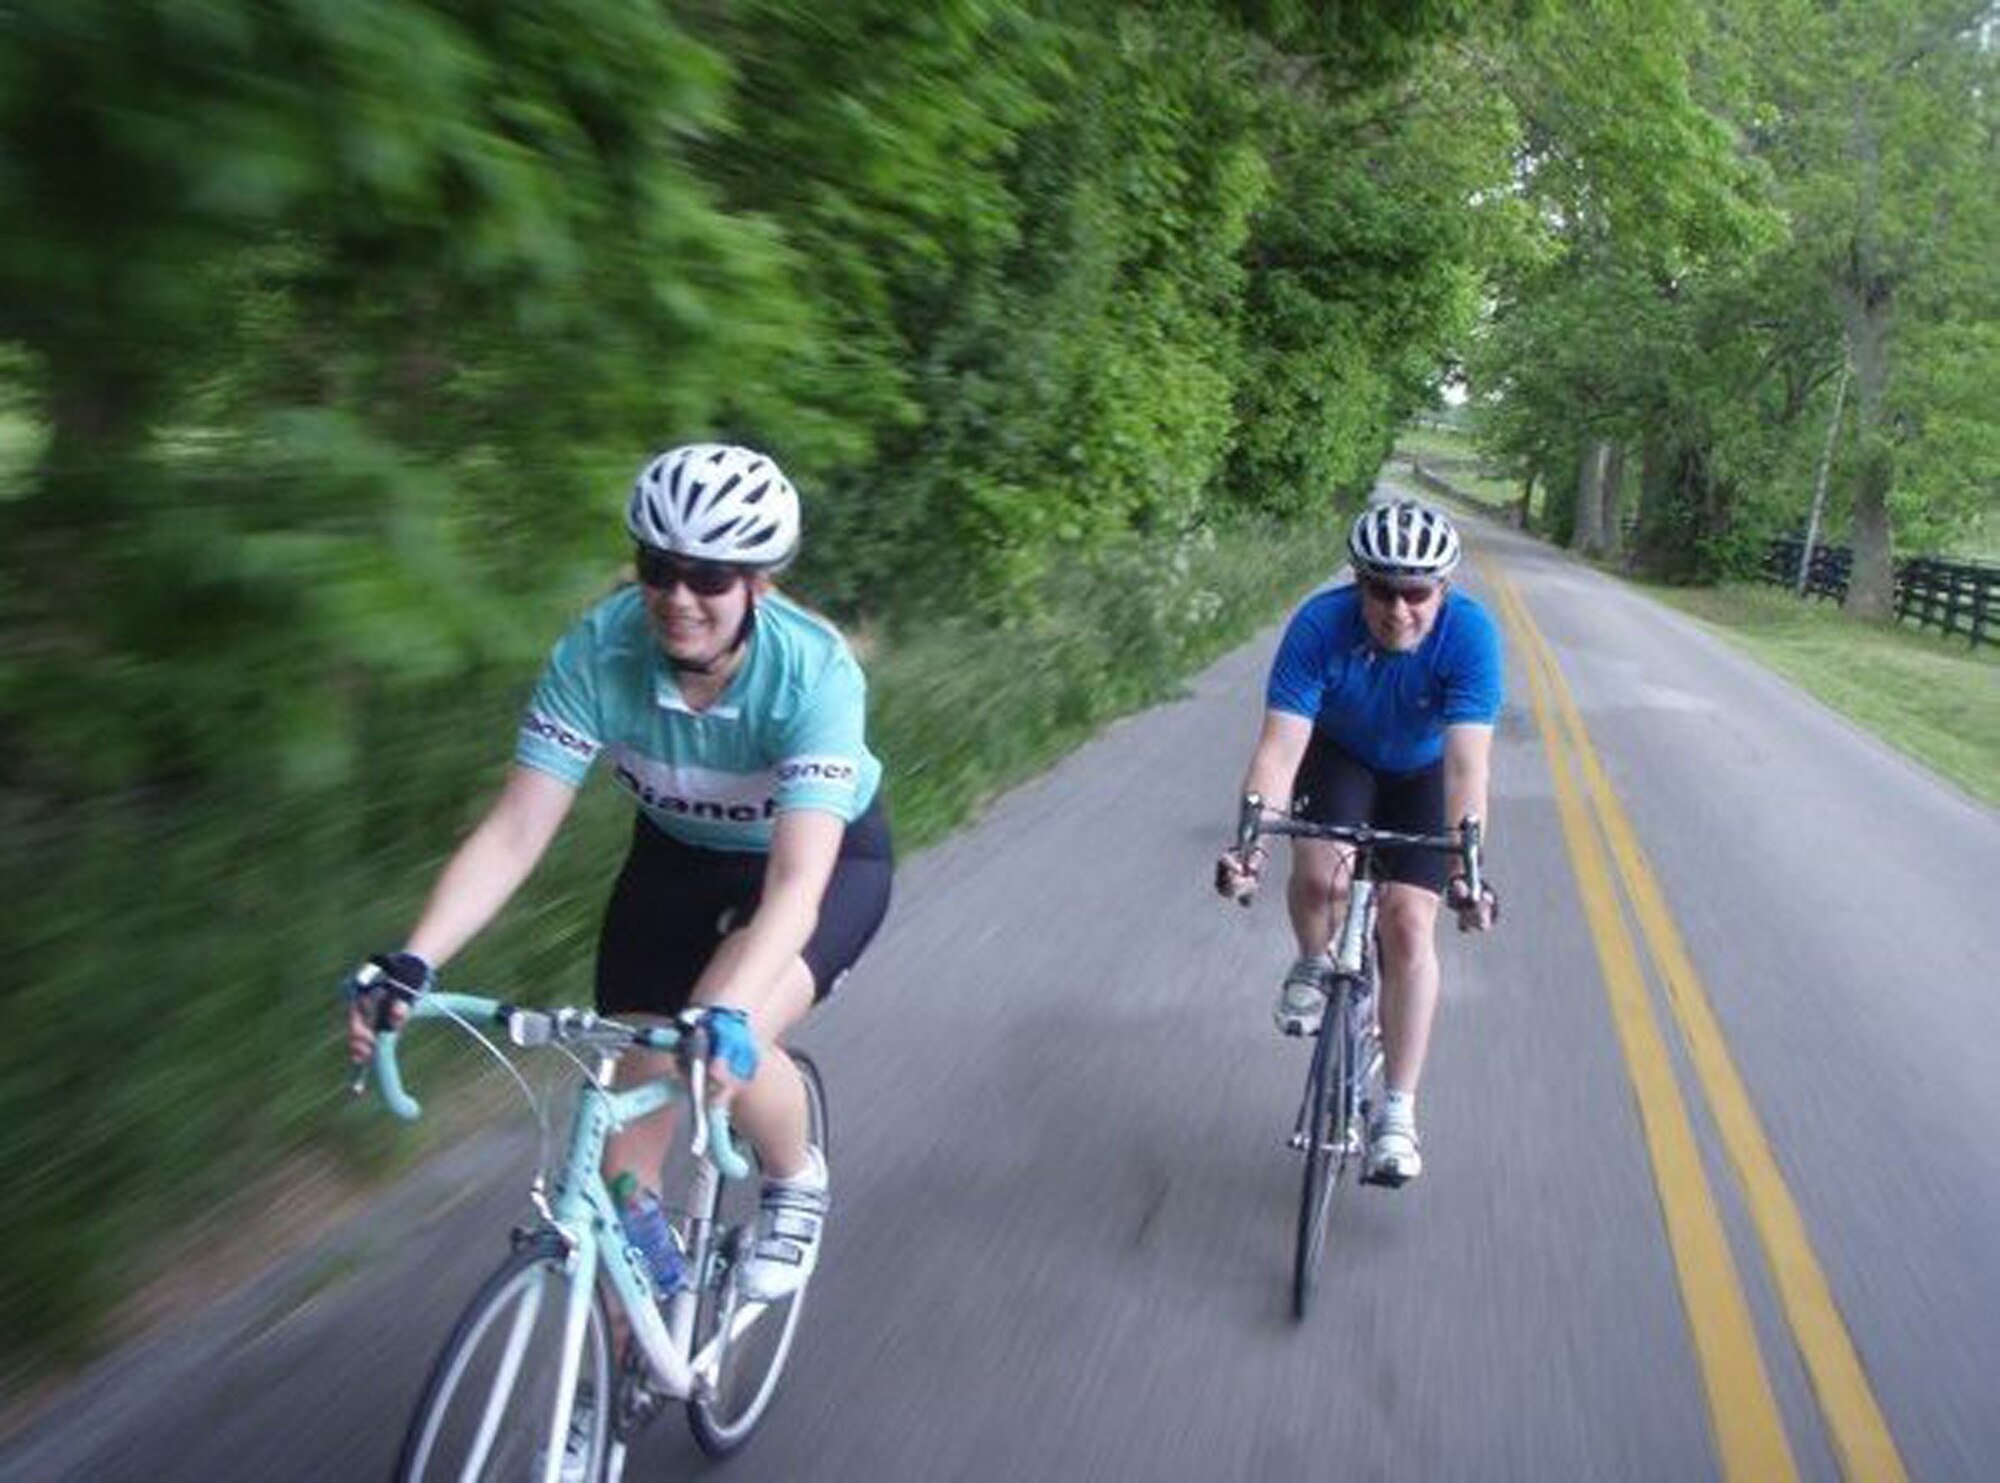 WRIGHT-PATTERSON AIR FORCE BASE, Ohio - (Right to left) Senior Airman Ronald "Les" Campbell, 445th Maintenance Squadron knowledge operations management, and his wife, Cassie, enjoy a nice bike ride together. (Courtesy photo)